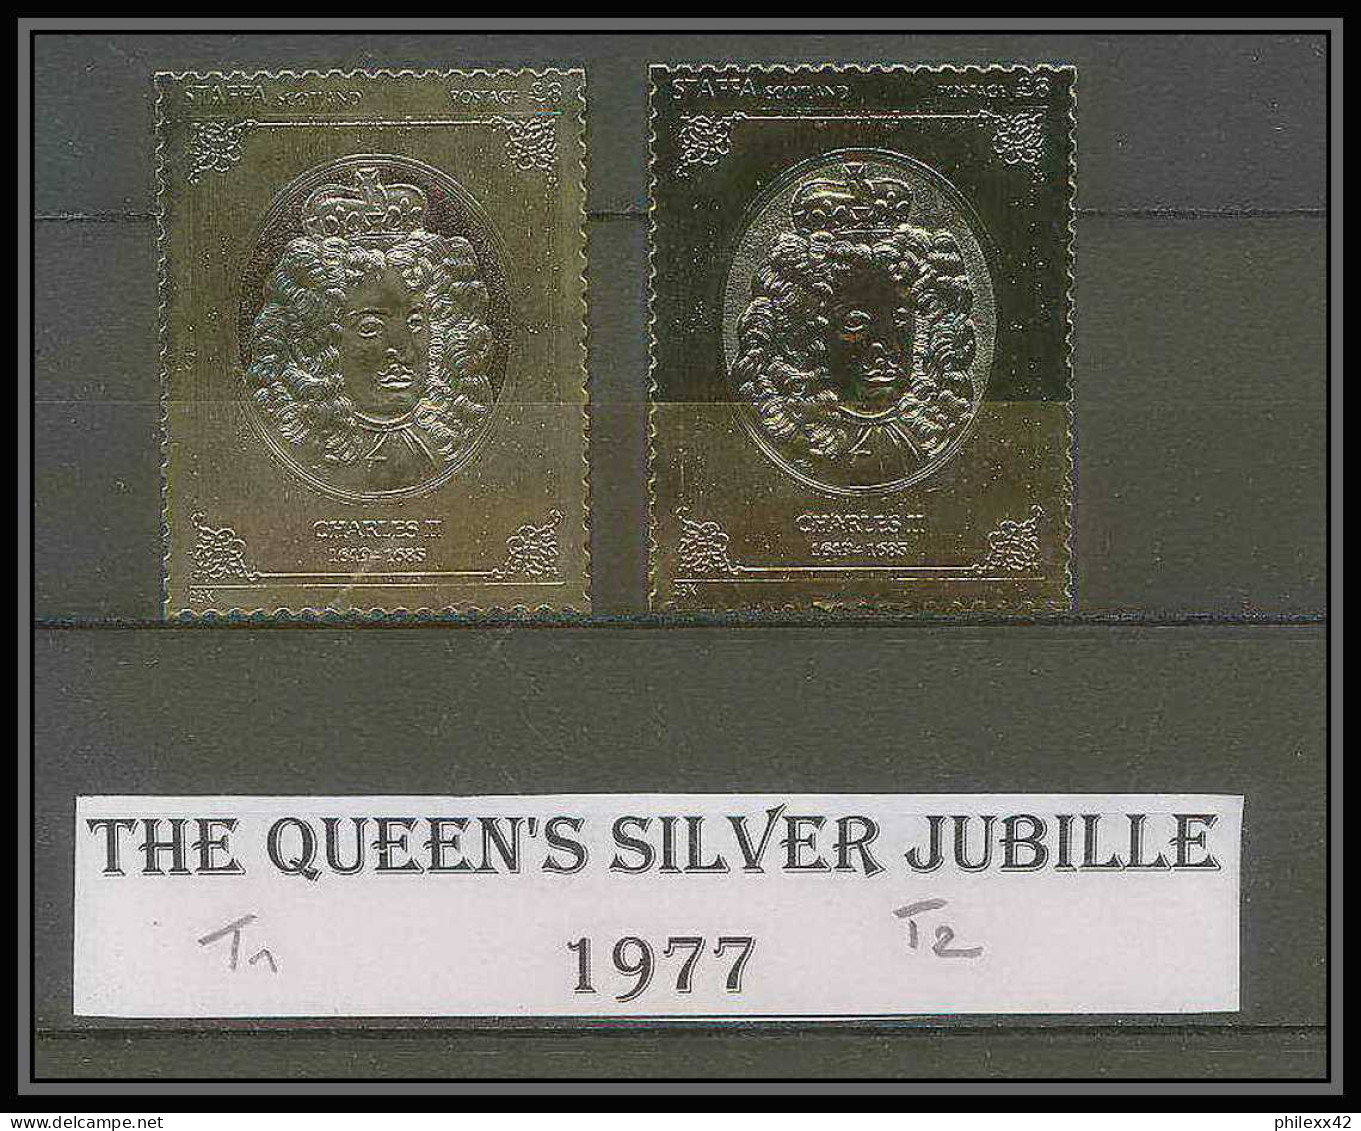 462a Staffa Scotland The Queen's Silver Jubilee 1977 OR Gold Stamps Monarchy United Kingdom Charles 2 Type 1& 2 ** - Scozia